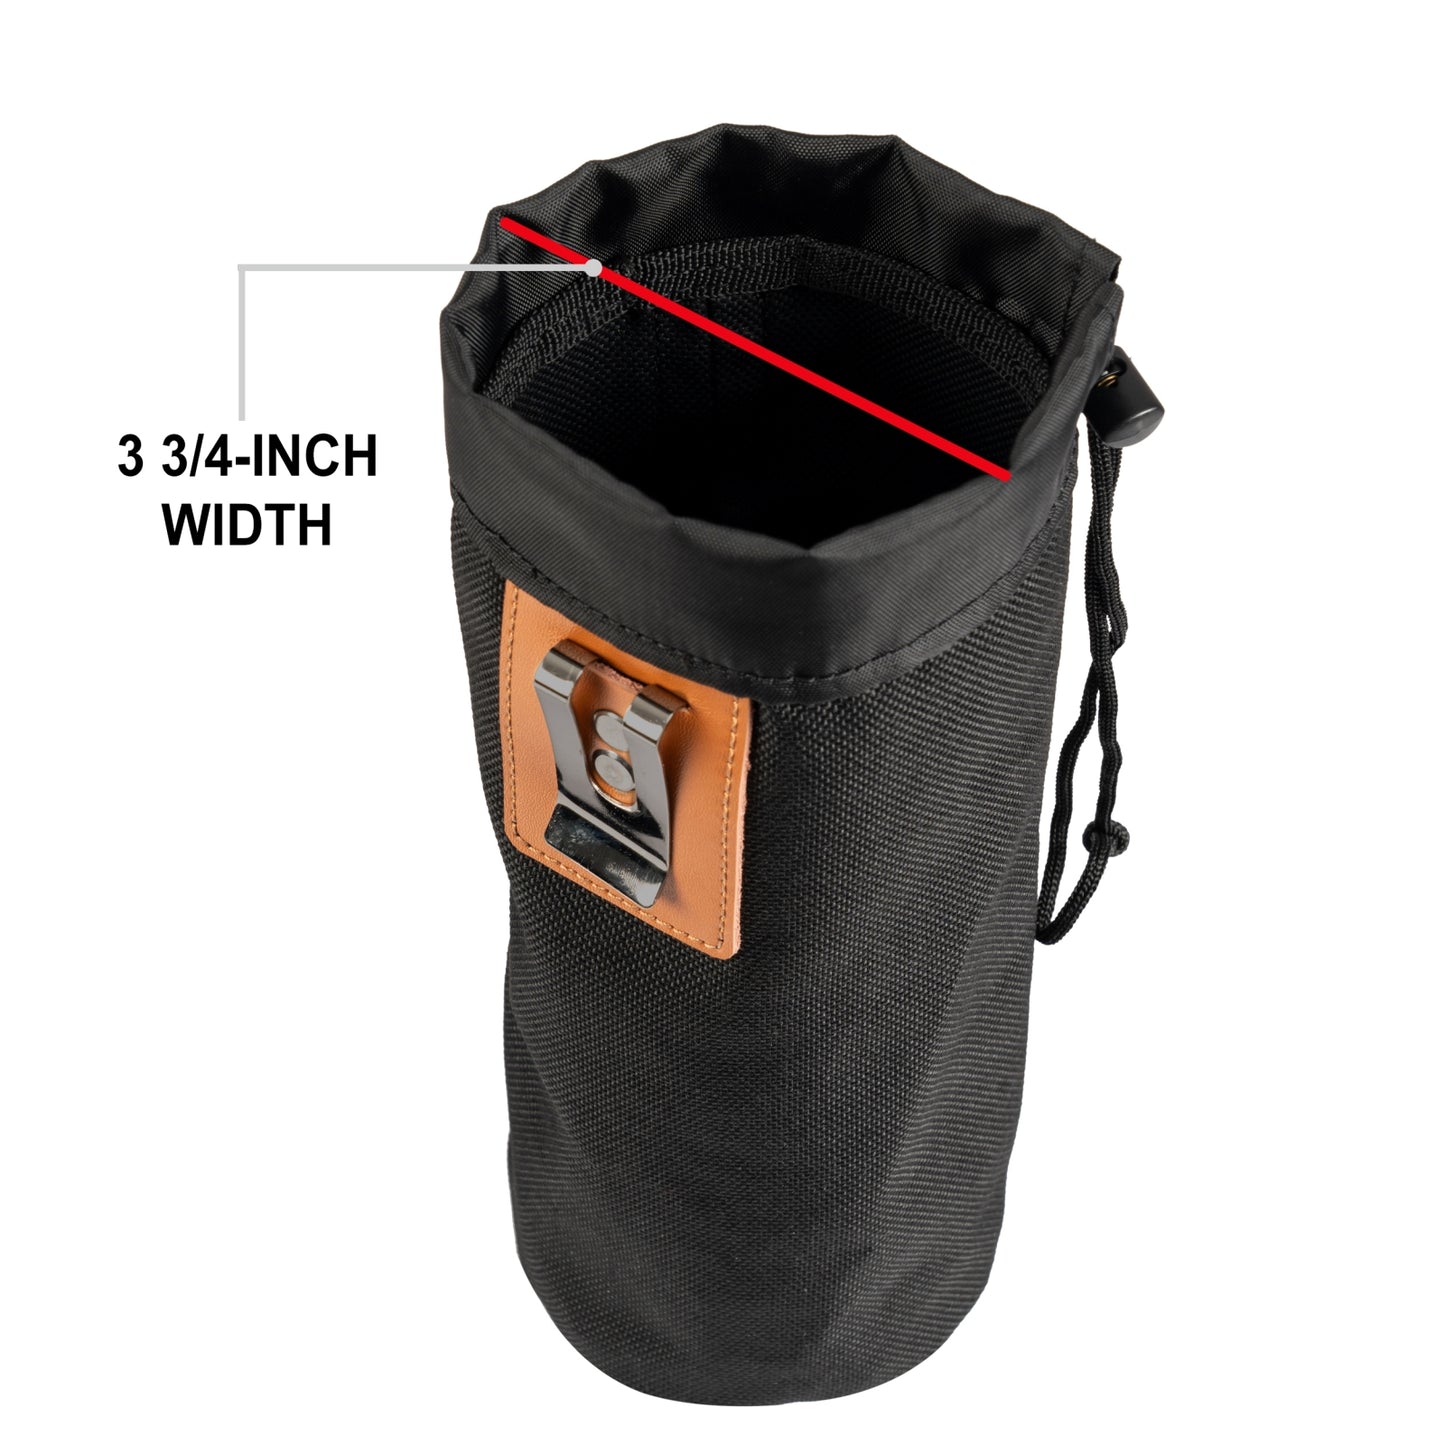 Perkins Builder Brothers 10-7/8-Inch-Long Bolt Storage Pouch with Tool Belt Clip-On